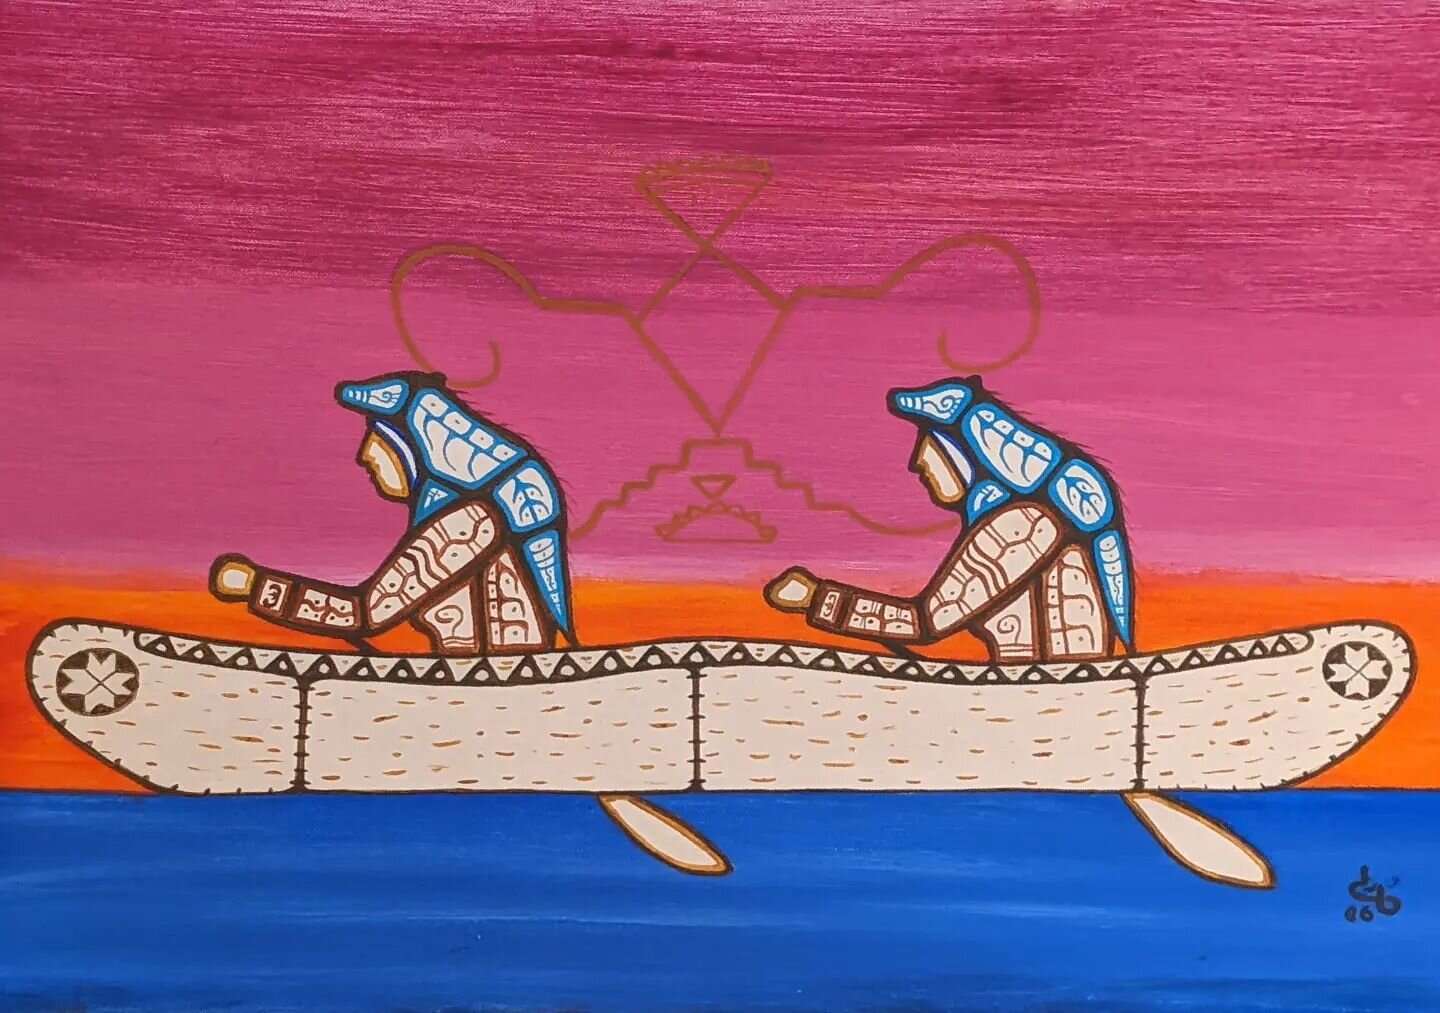 &quot;The Two Weasels: Mikmaq Legend&quot; by David Brooks. Acrylic on canvas, 18&quot;x 24&quot;. 2006.